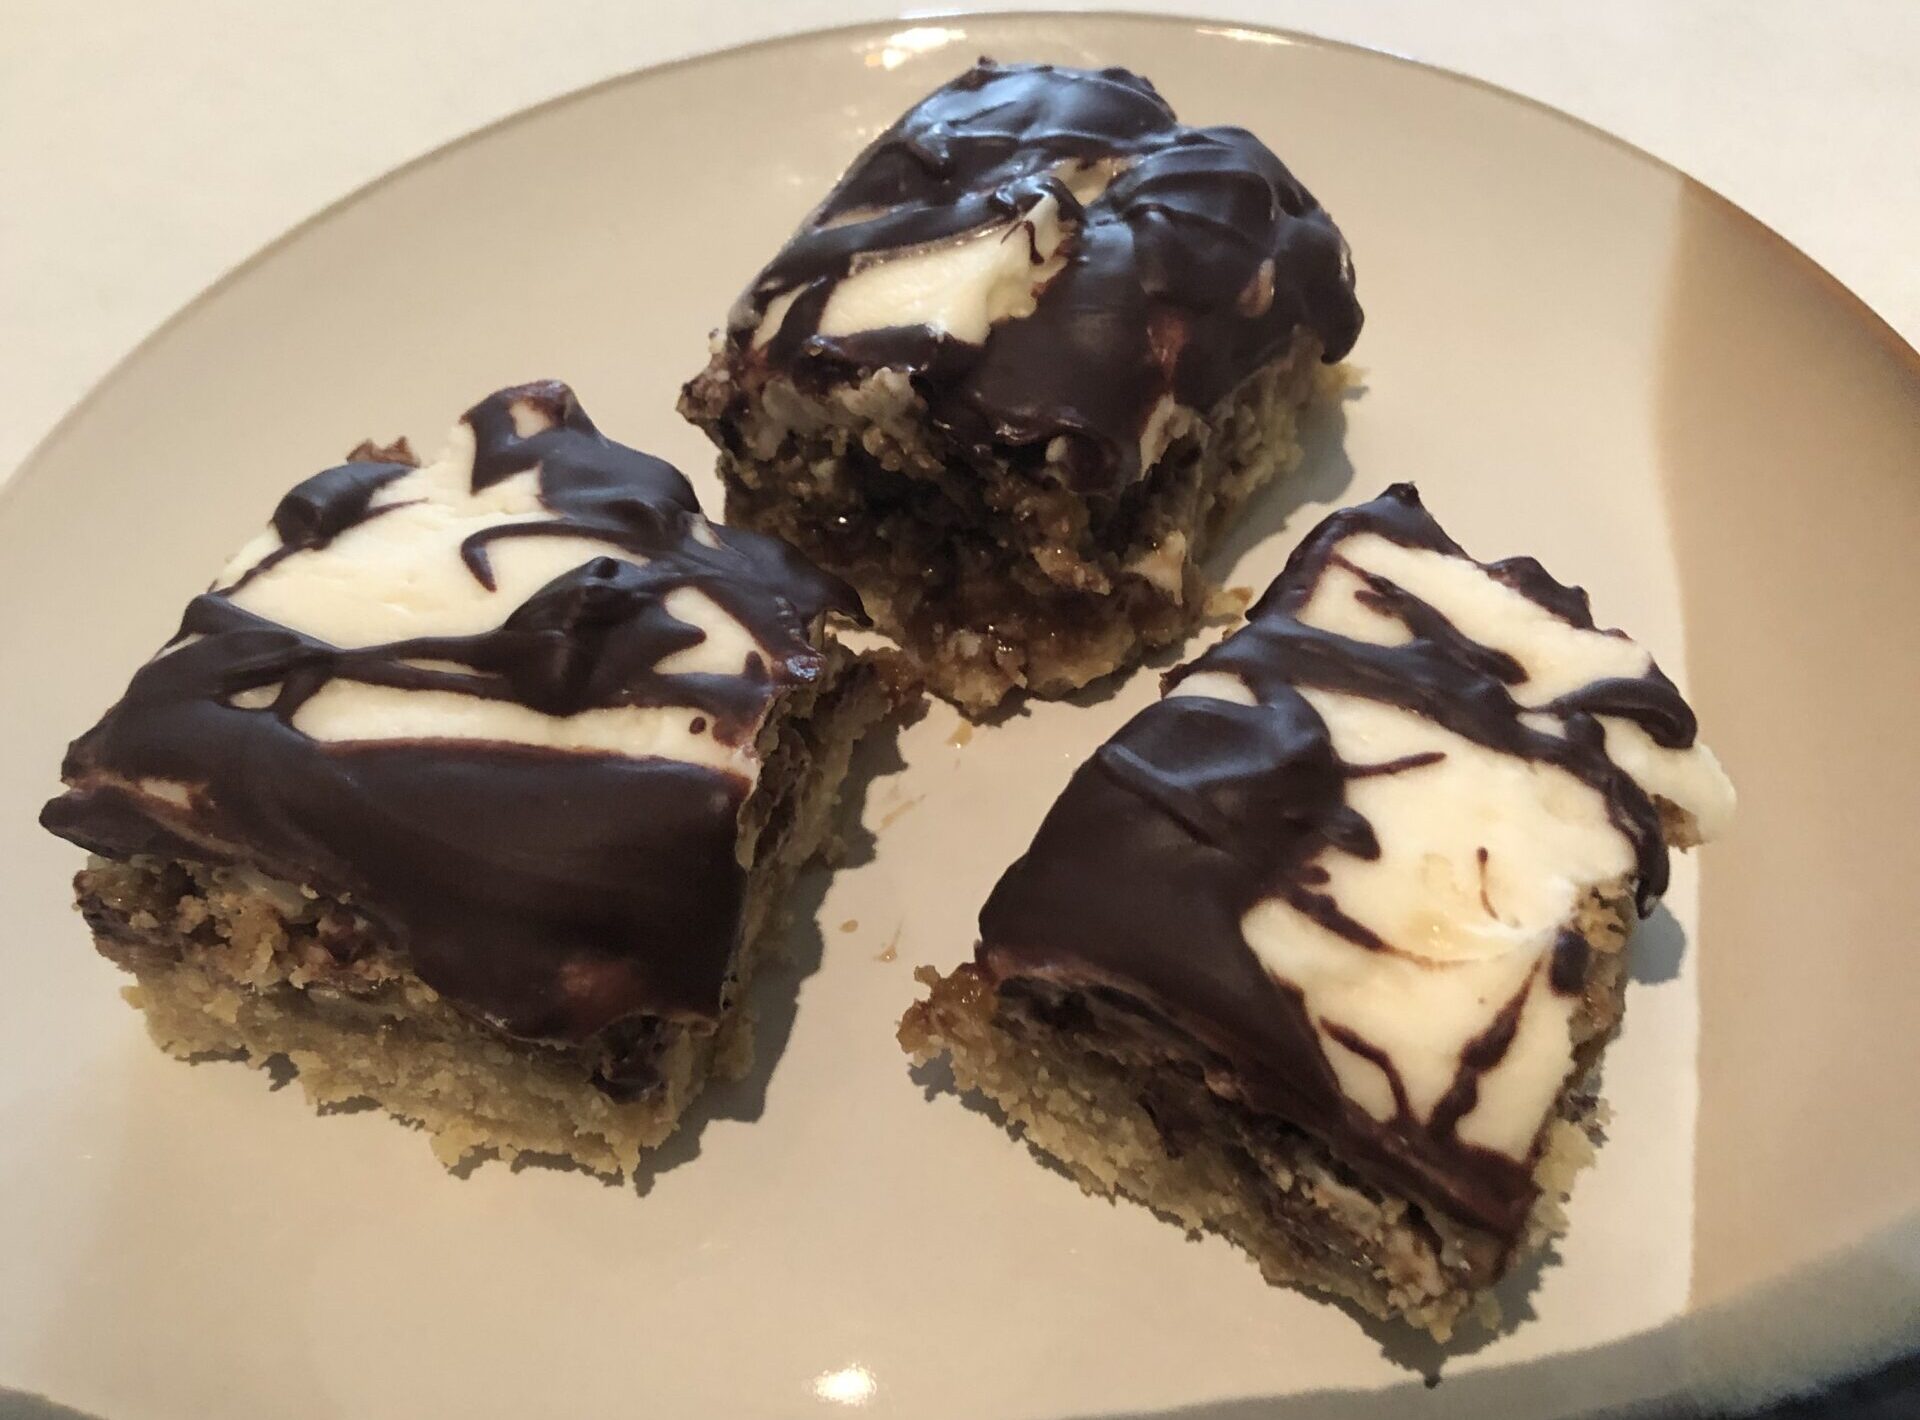 Three dessert bars with white frosting and a chocolate drizzle.